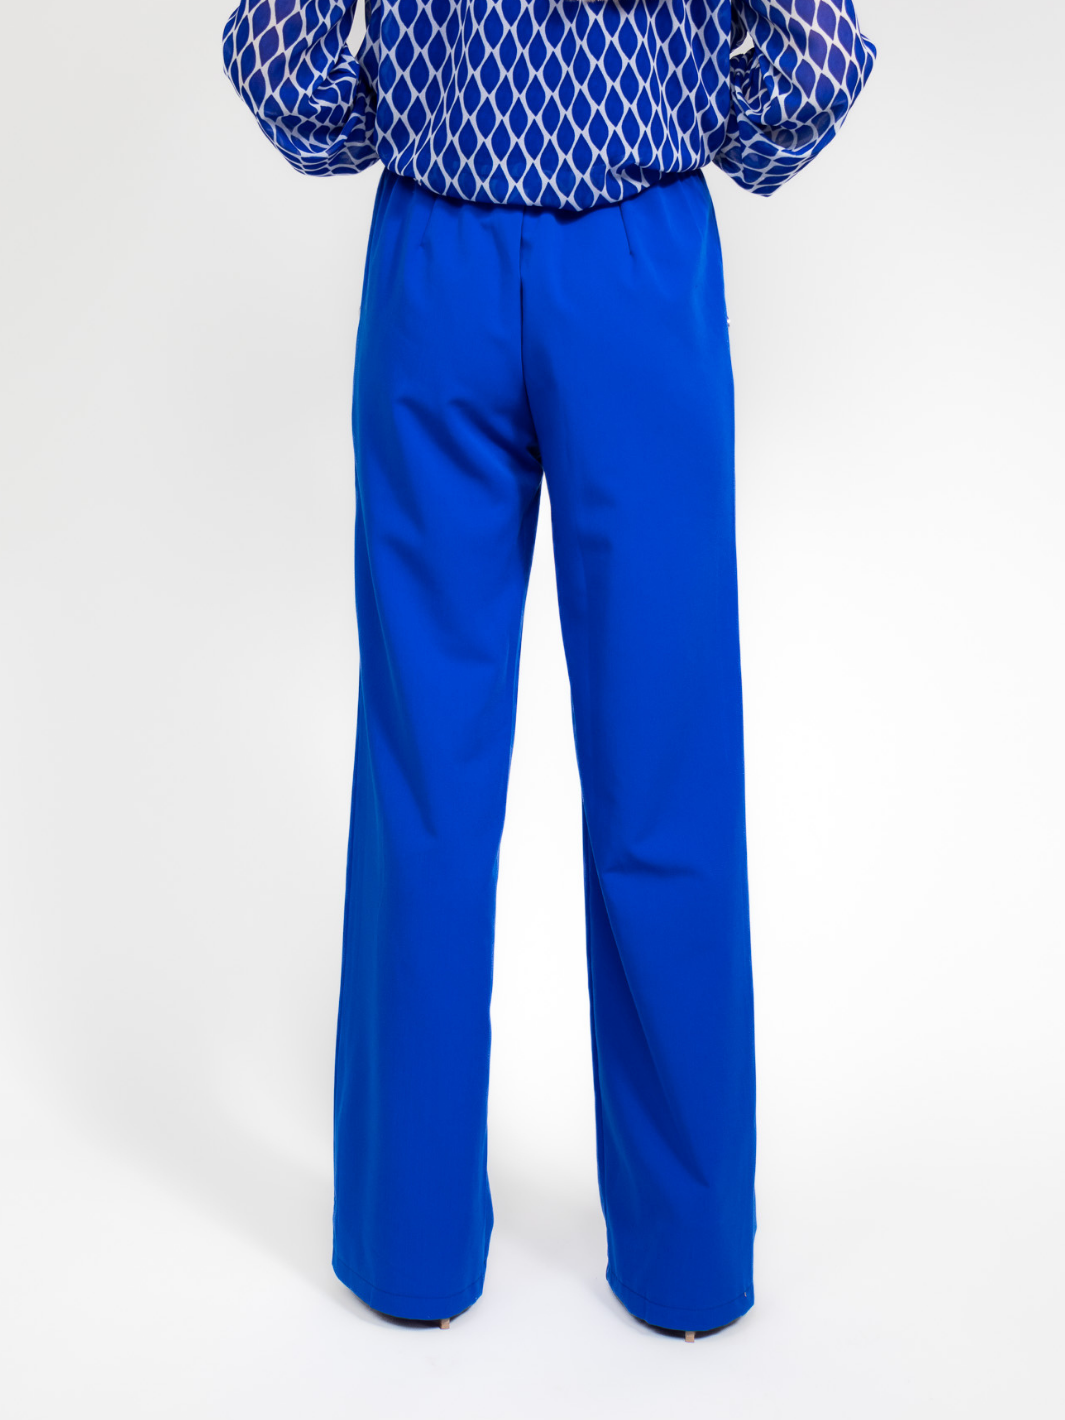 Kate & Pippa Sardinia Button Trousers In Blue-Nicola Ross